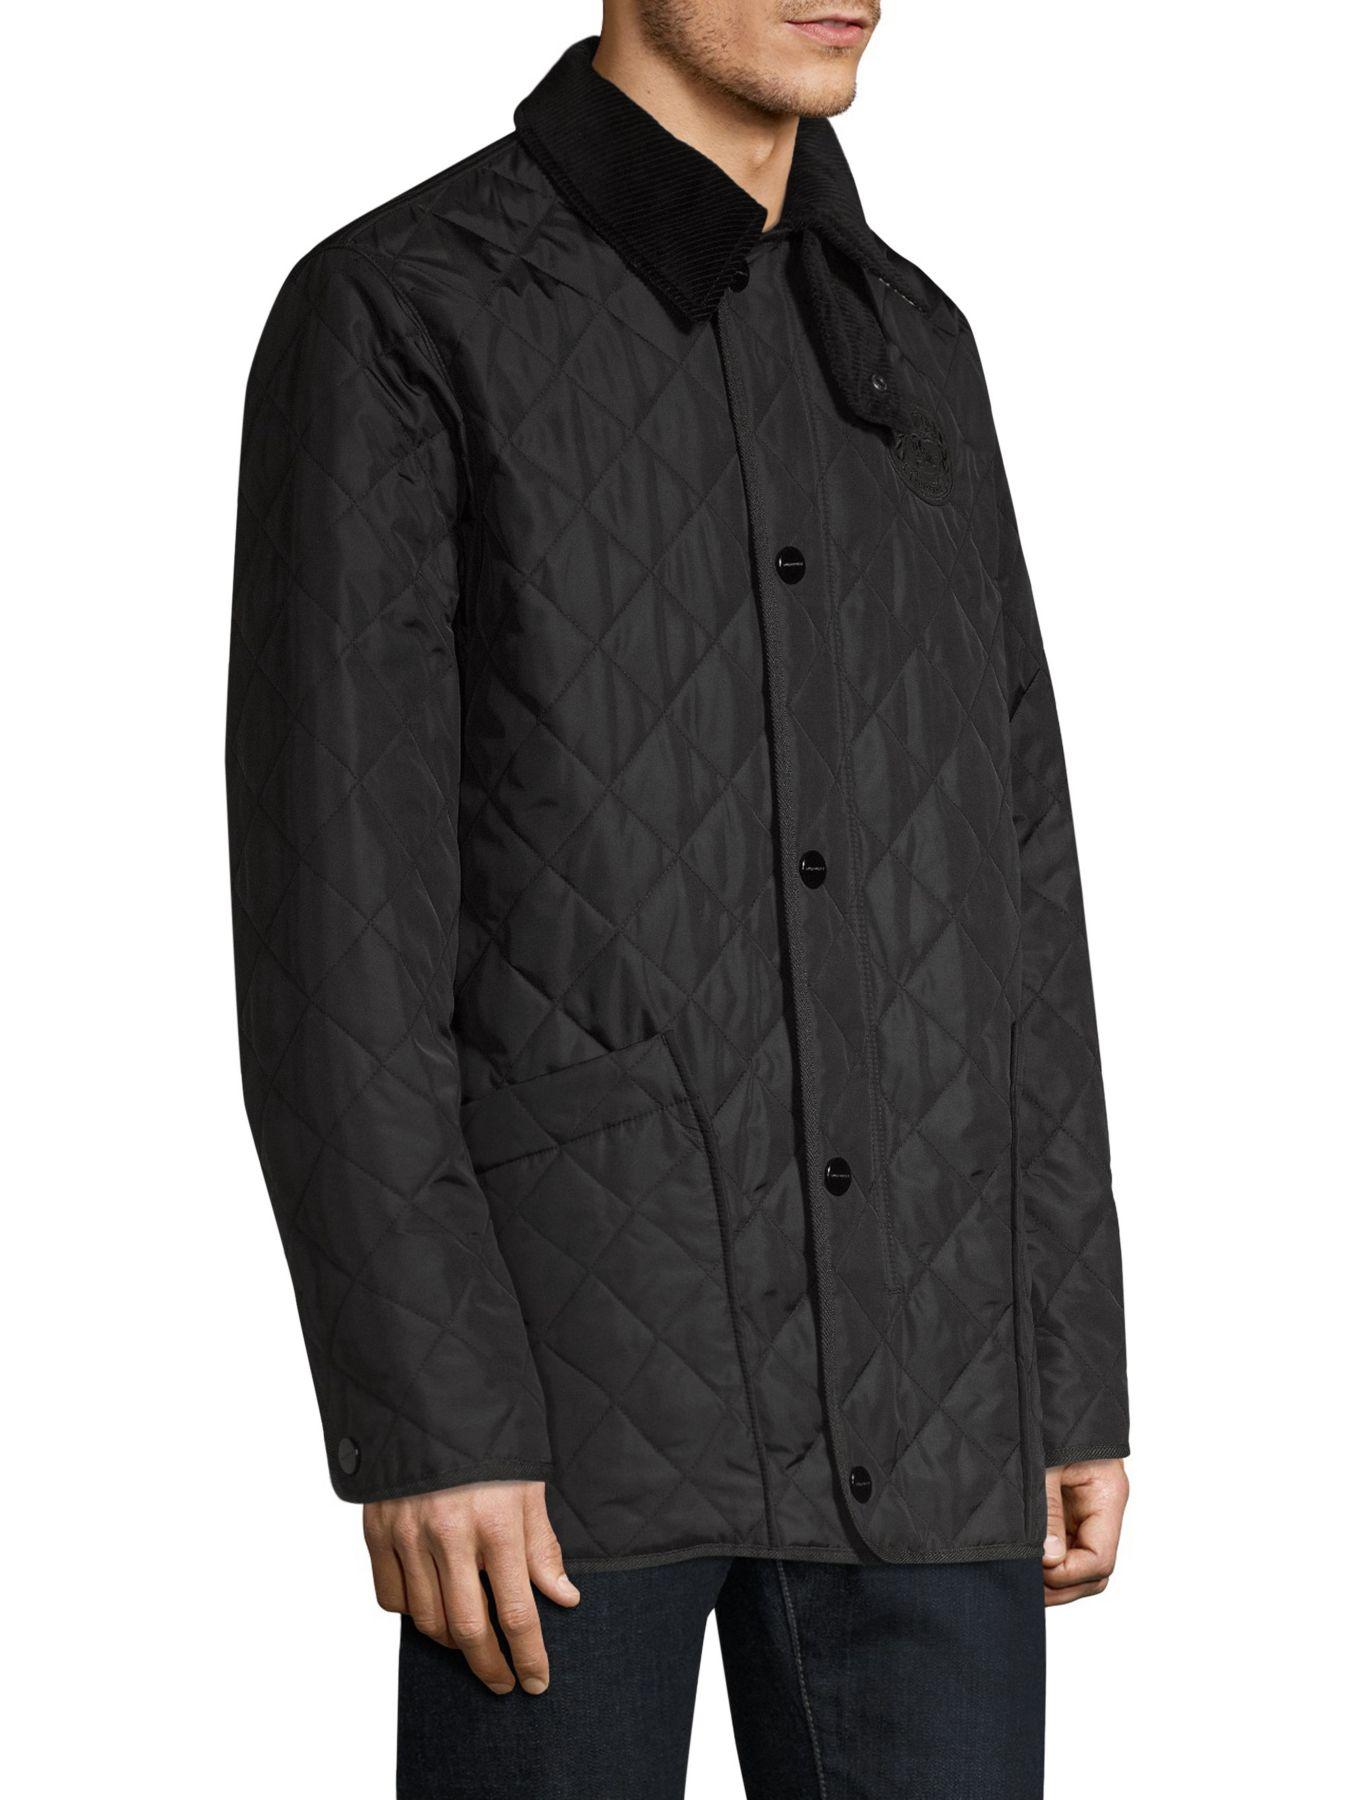 Burberry Corduroy Cotswold Quilted Barn Jacket in Black for Men - Lyst